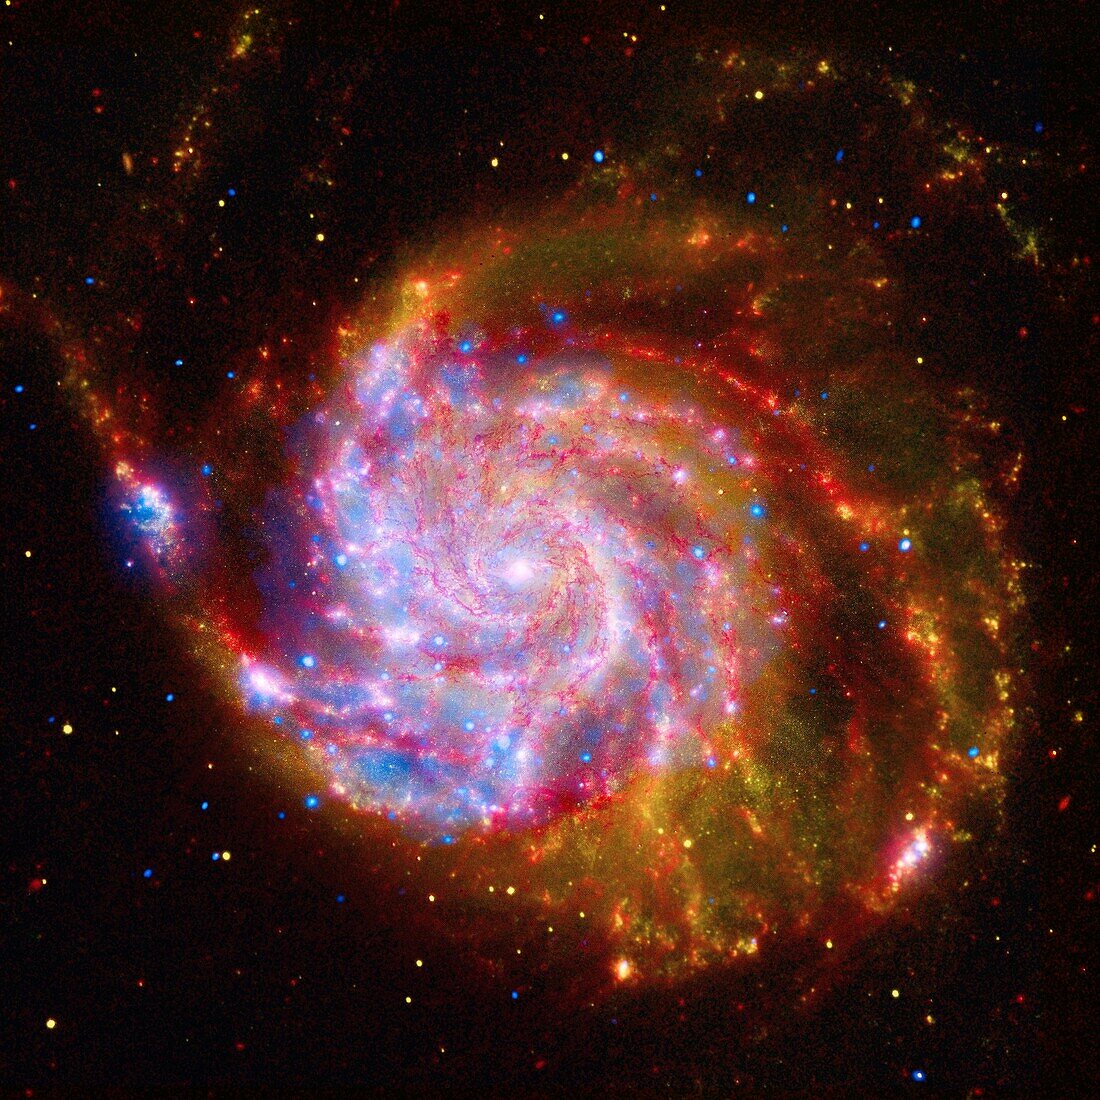 This image of the spiral galaxy Messier 101 is a composite of views from the Spitzer Space Telescope, Hubble Space Telescope, and Chandra X-ray Observatory …